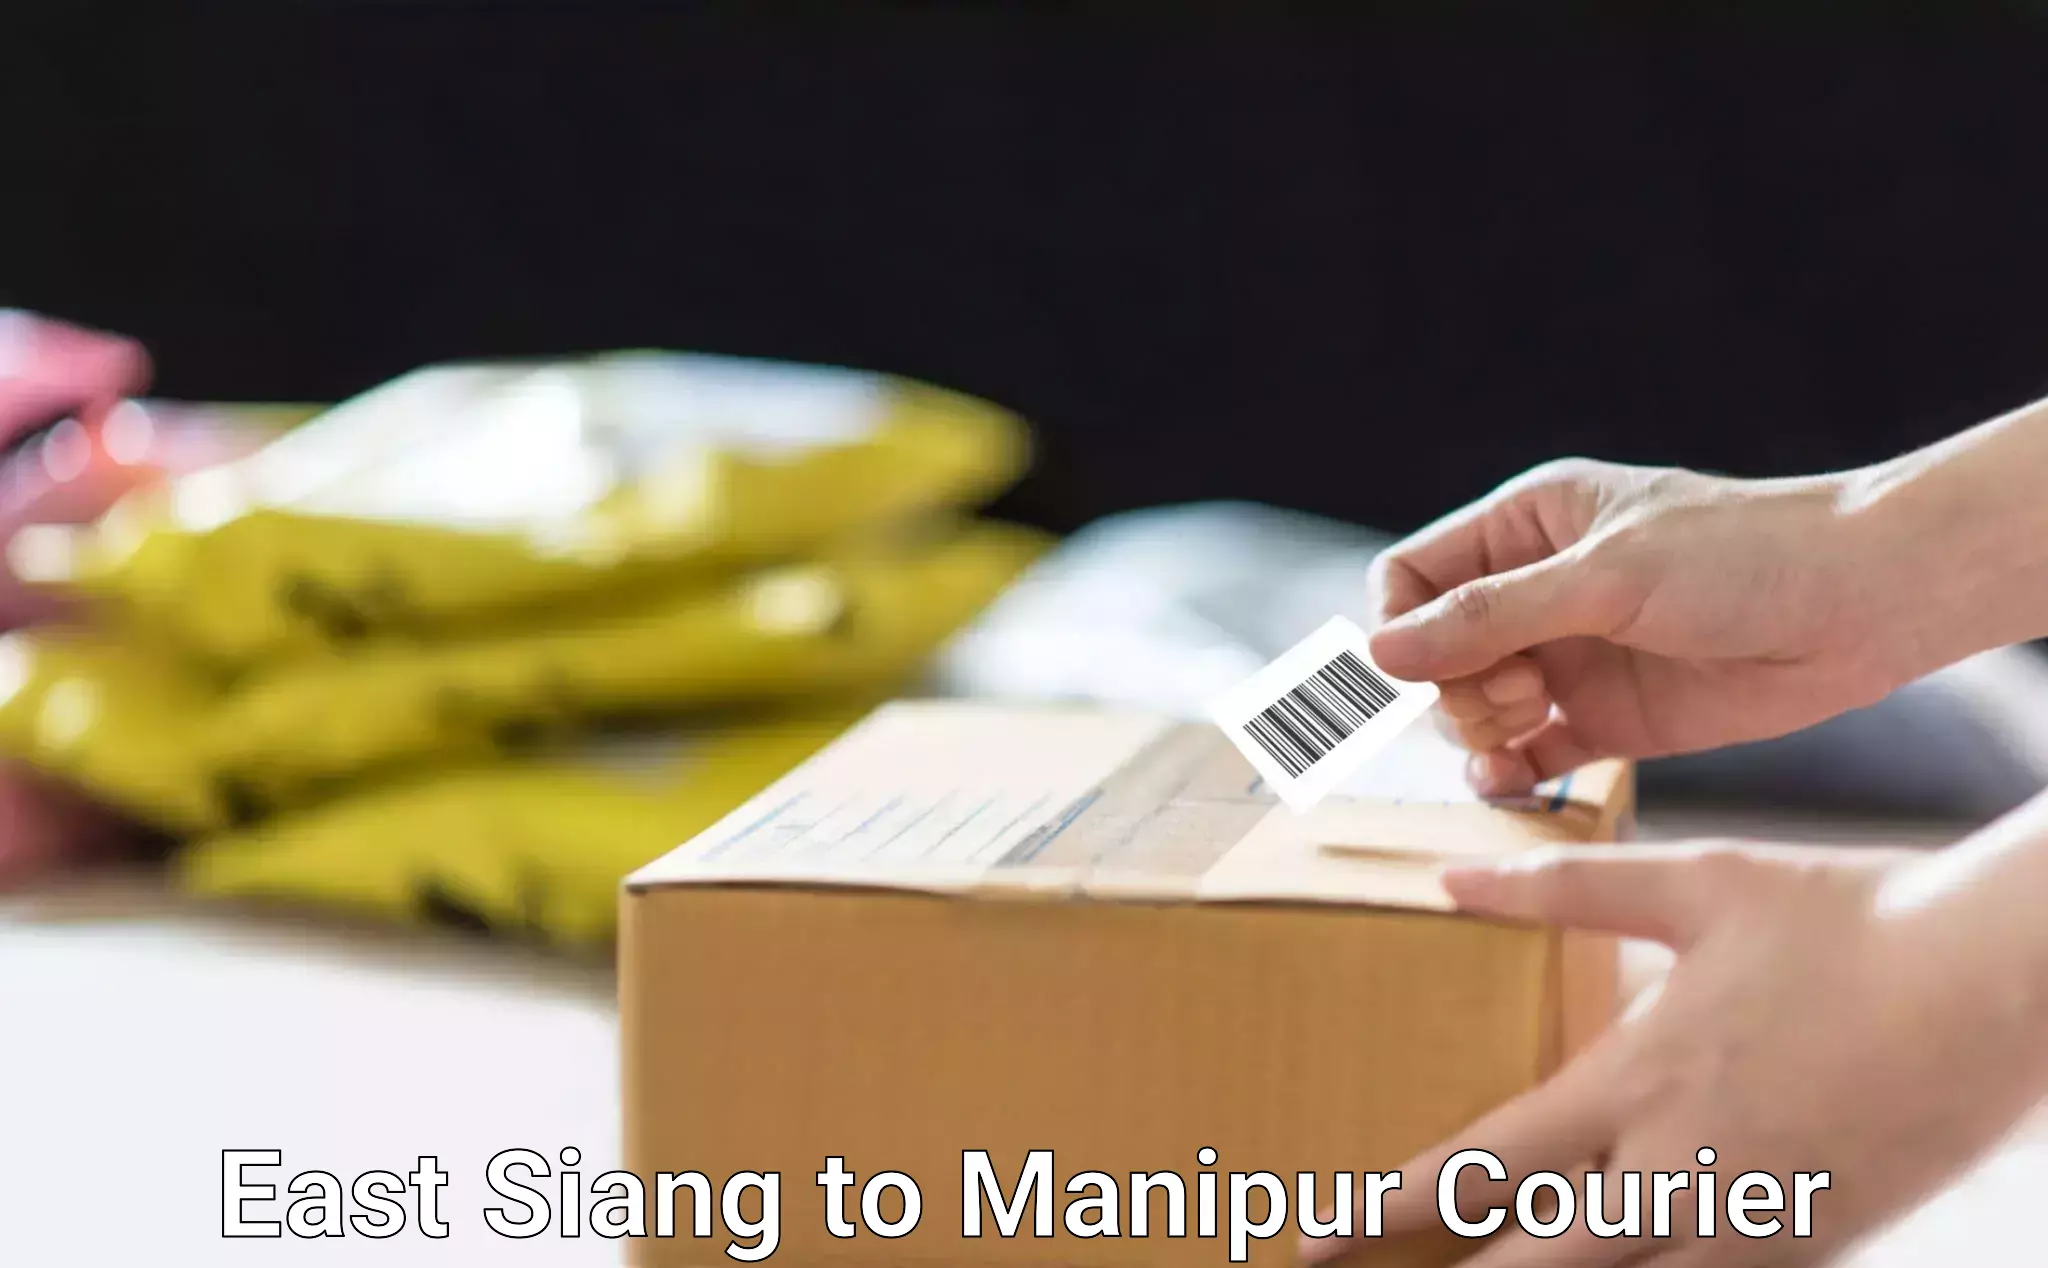 Courier service comparison East Siang to Manipur